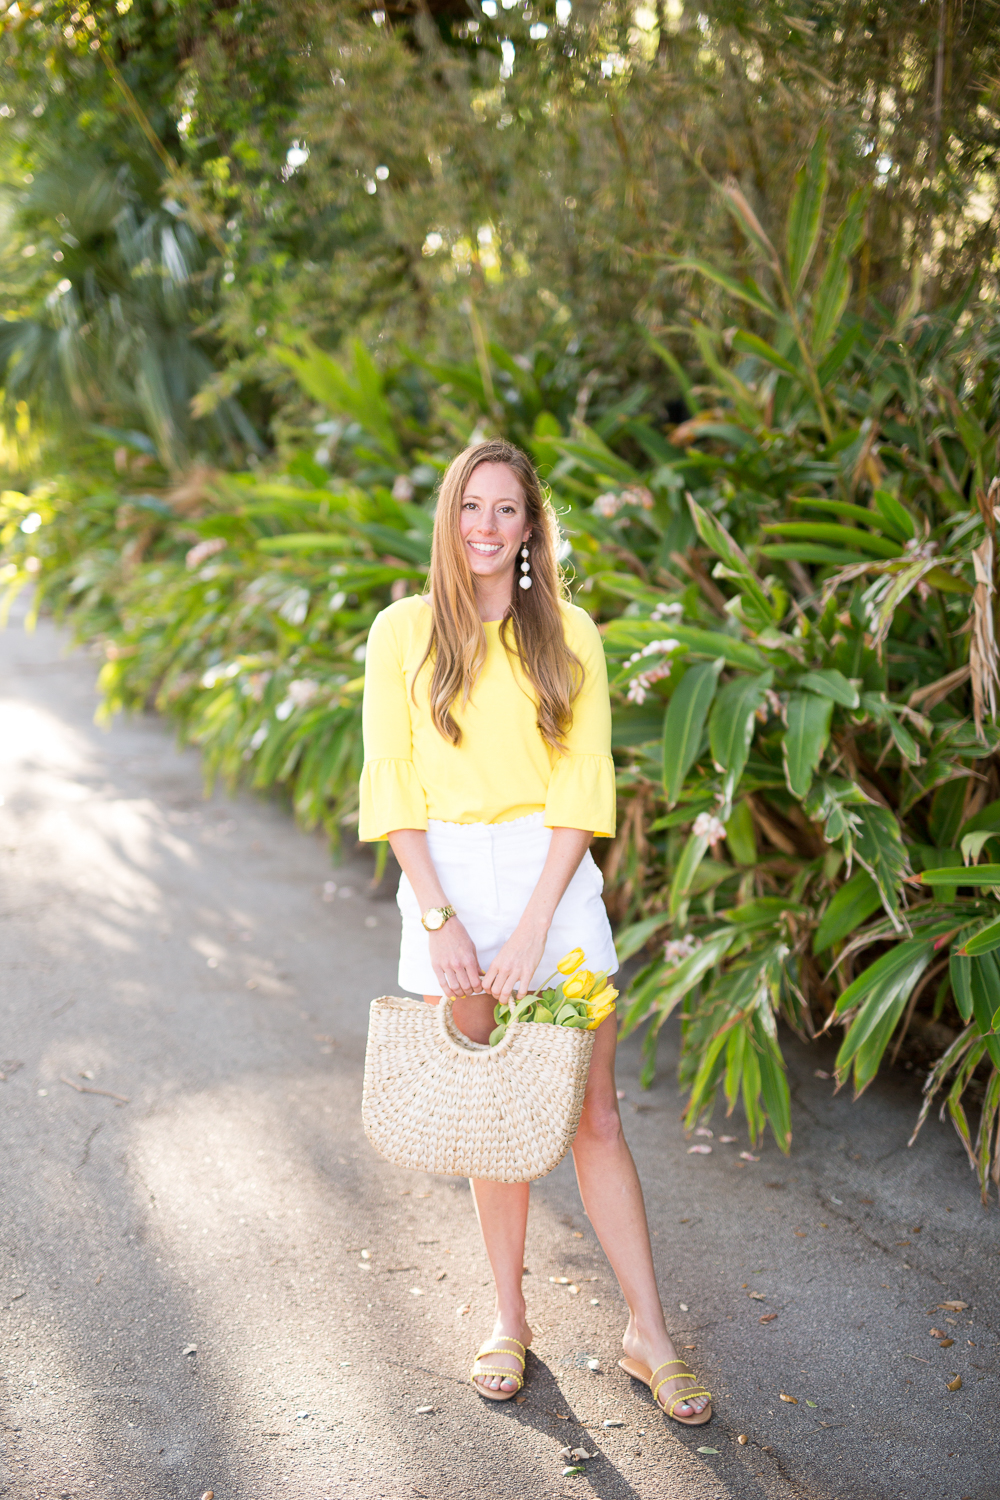 Classic Spring Outfit Idea - Yellow Top